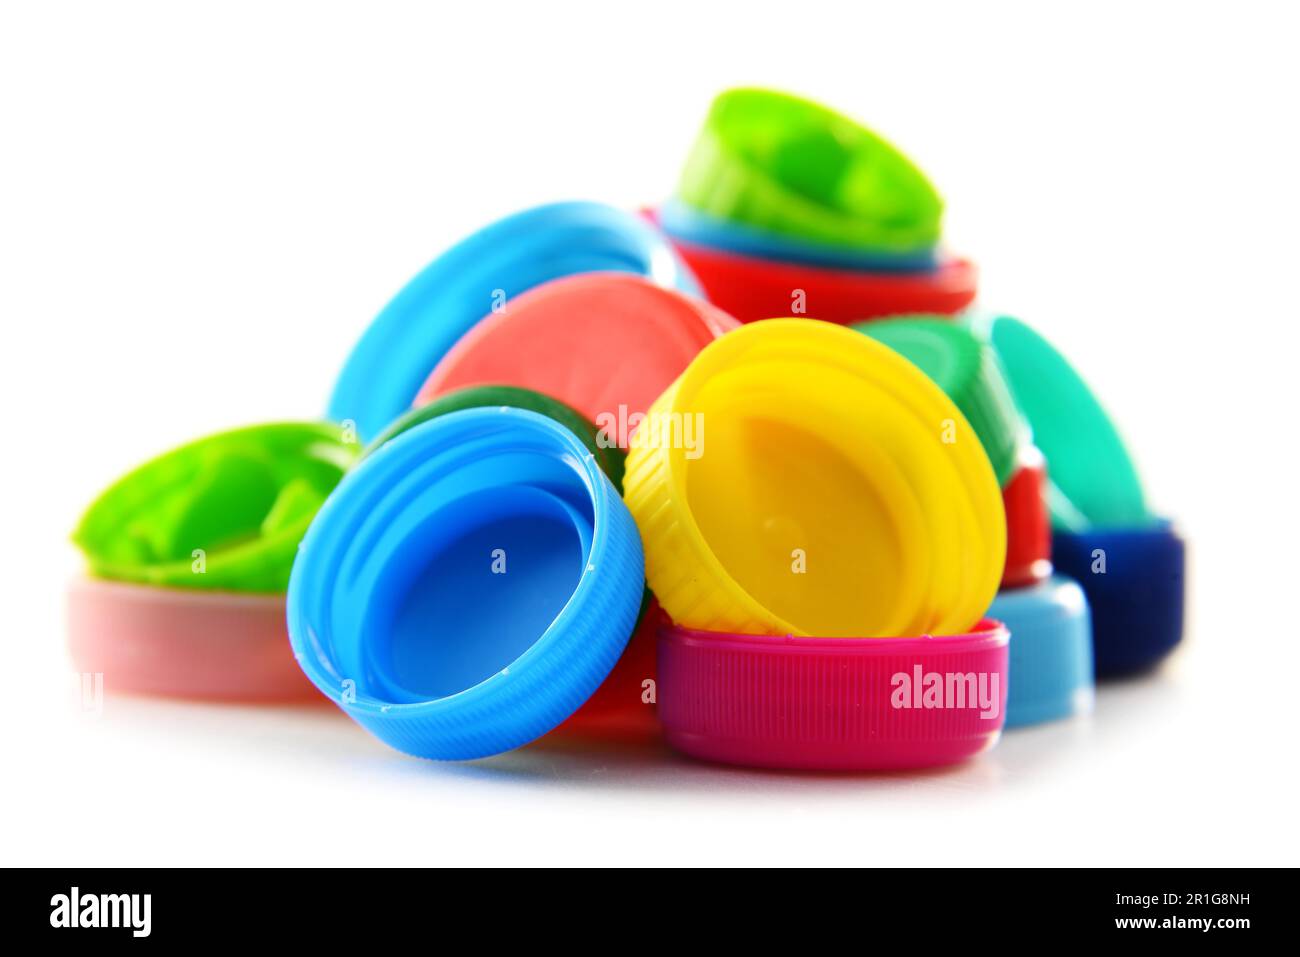 Composition with colorful plastic bottle caps Stock Photo